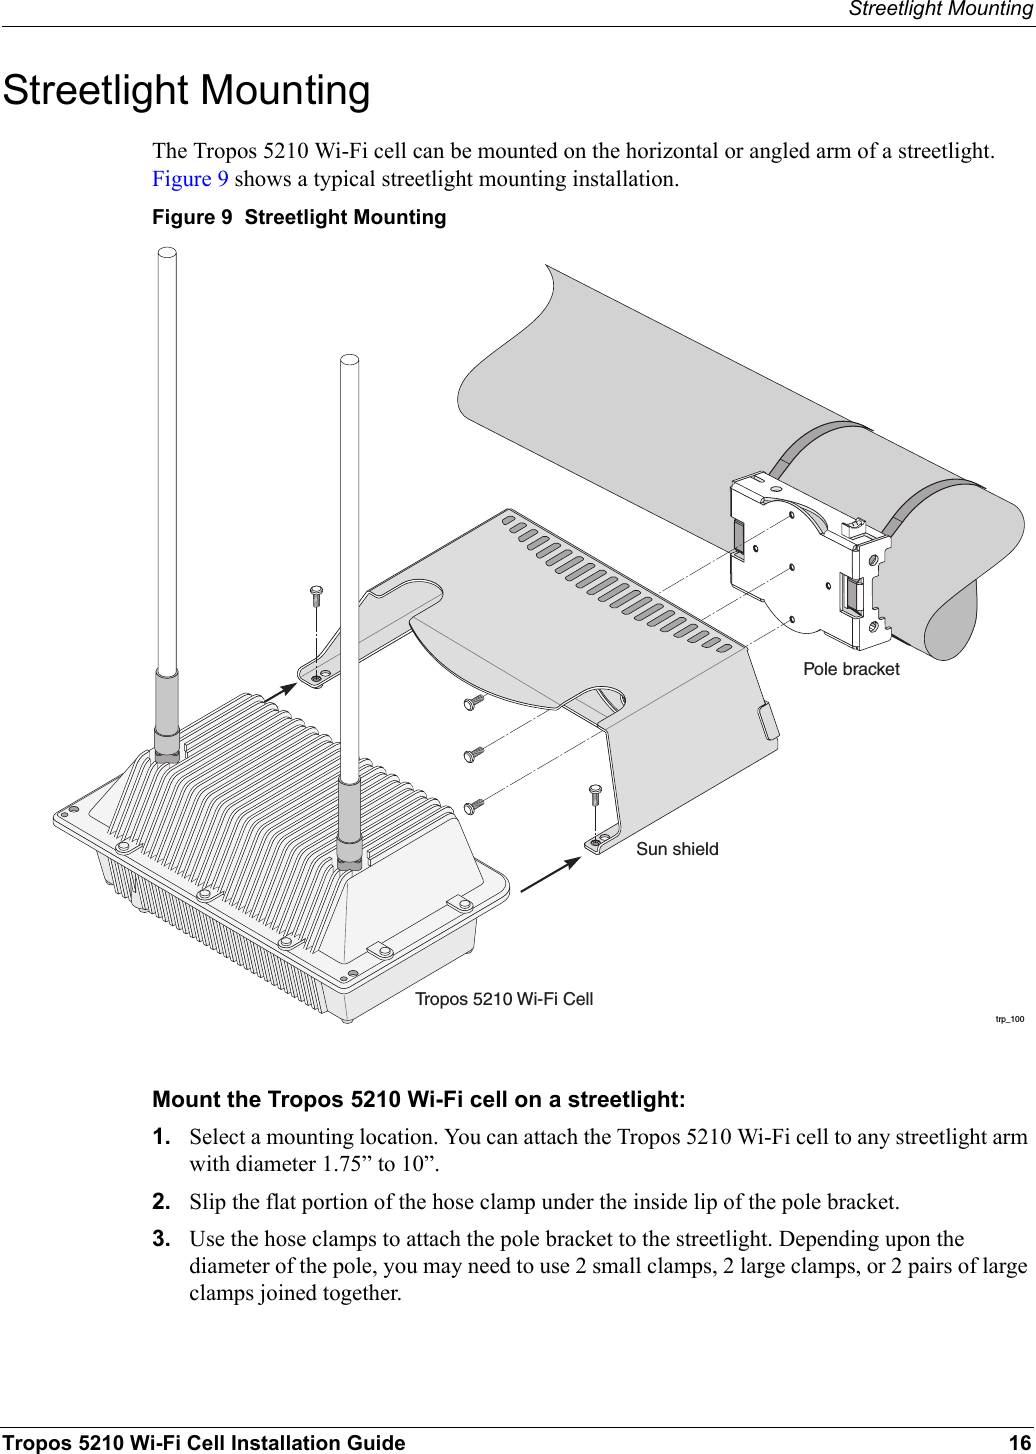 Streetlight MountingTropos 5210 Wi-Fi Cell Installation Guide 16Streetlight MountingThe Tropos 5210 Wi-Fi cell can be mounted on the horizontal or angled arm of a streetlight. Figure 9 shows a typical streetlight mounting installation.Figure 9  Streetlight MountingMount the Tropos 5210 Wi-Fi cell on a streetlight:1. Select a mounting location. You can attach the Tropos 5210 Wi-Fi cell to any streetlight arm with diameter 1.75” to 10”.2. Slip the flat portion of the hose clamp under the inside lip of the pole bracket. 3. Use the hose clamps to attach the pole bracket to the streetlight. Depending upon the diameter of the pole, you may need to use 2 small clamps, 2 large clamps, or 2 pairs of large clamps joined together.trp_100Pole bracketTropos 5210 Wi-Fi CellSun shield